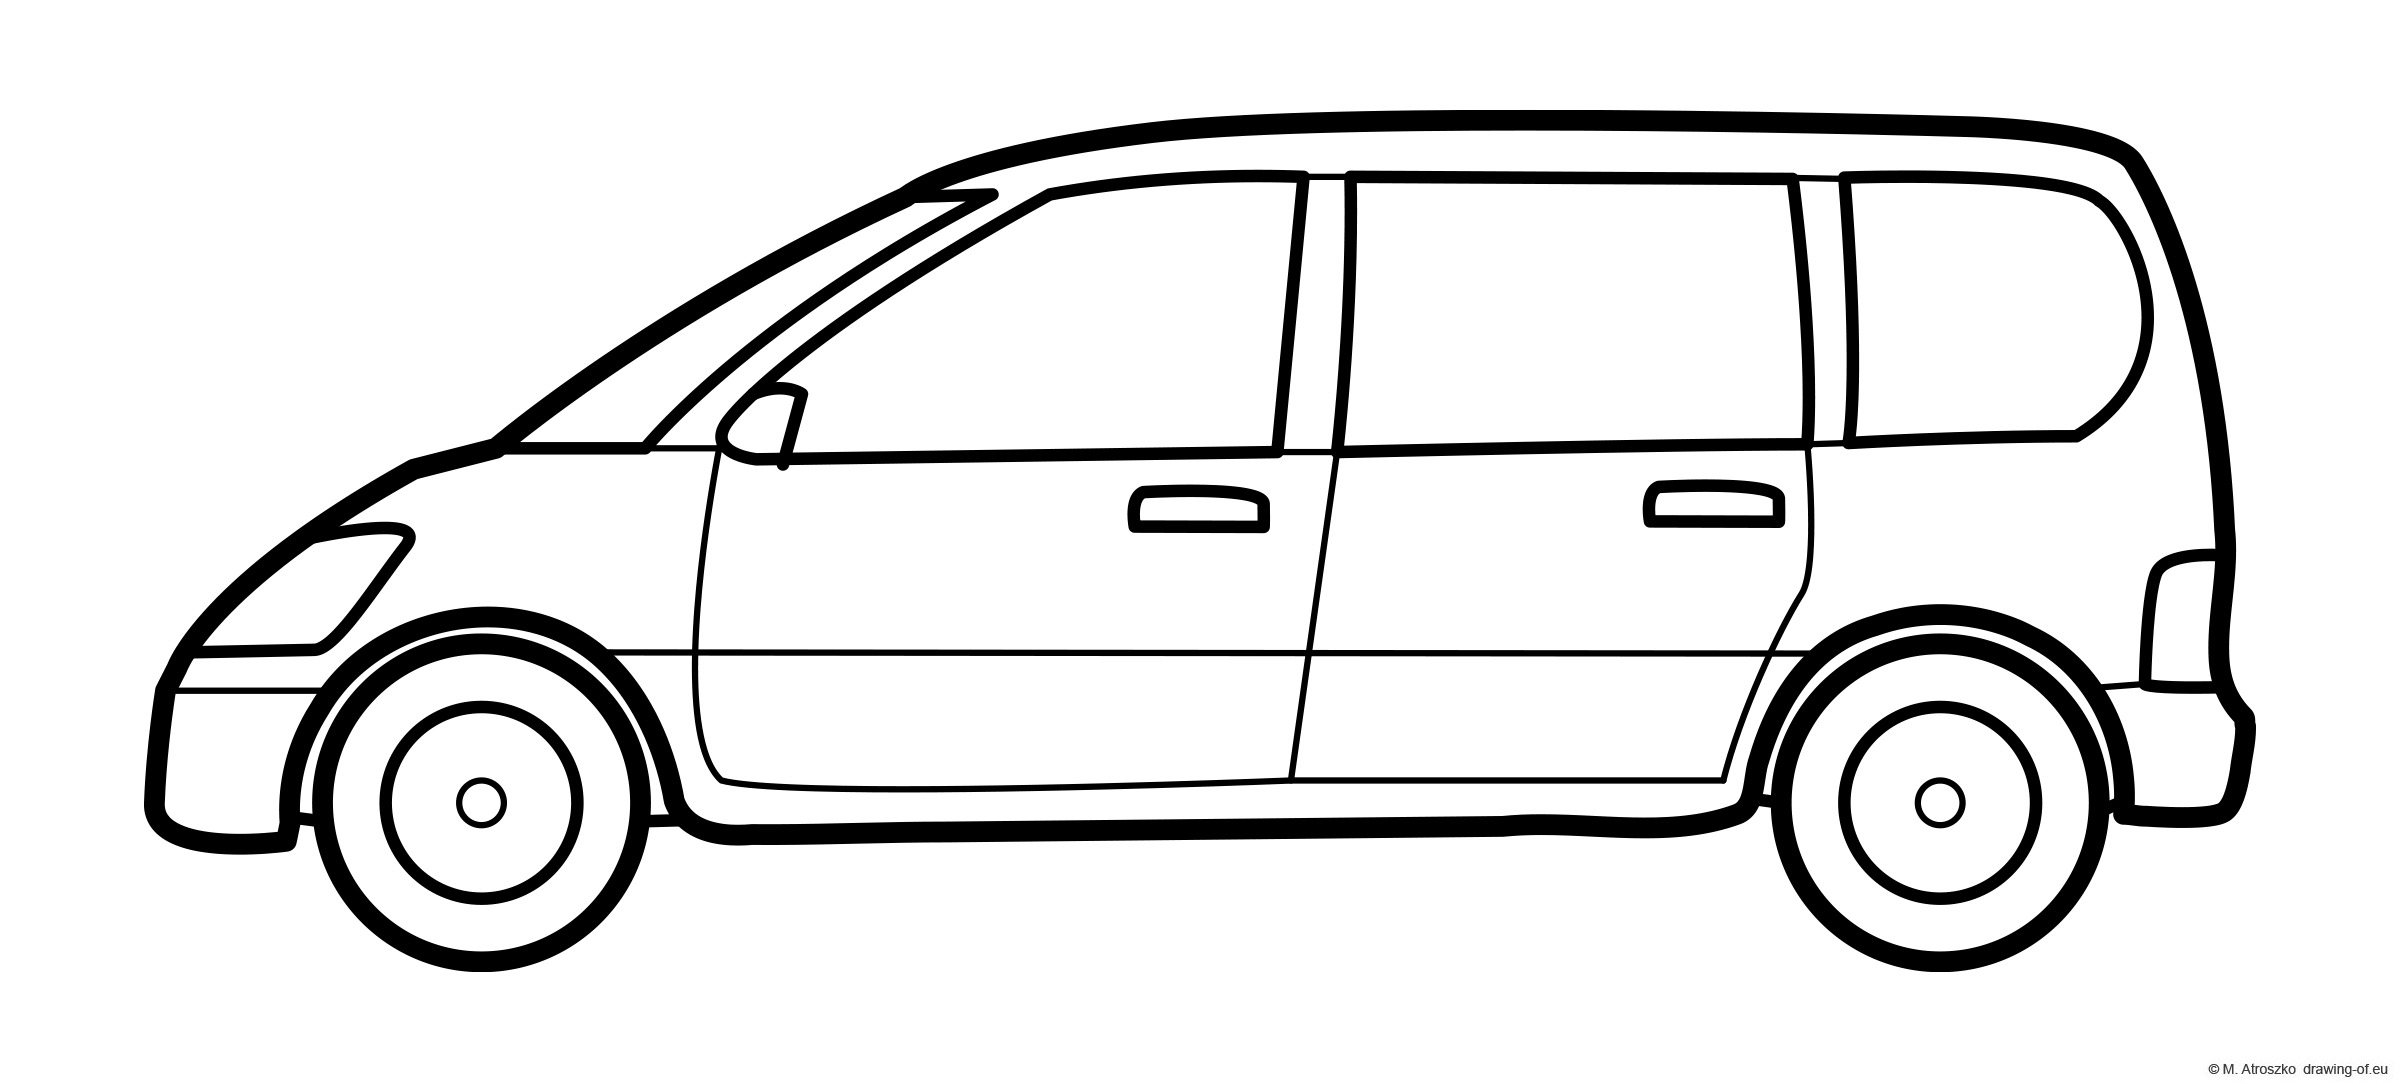 Family car coloring page